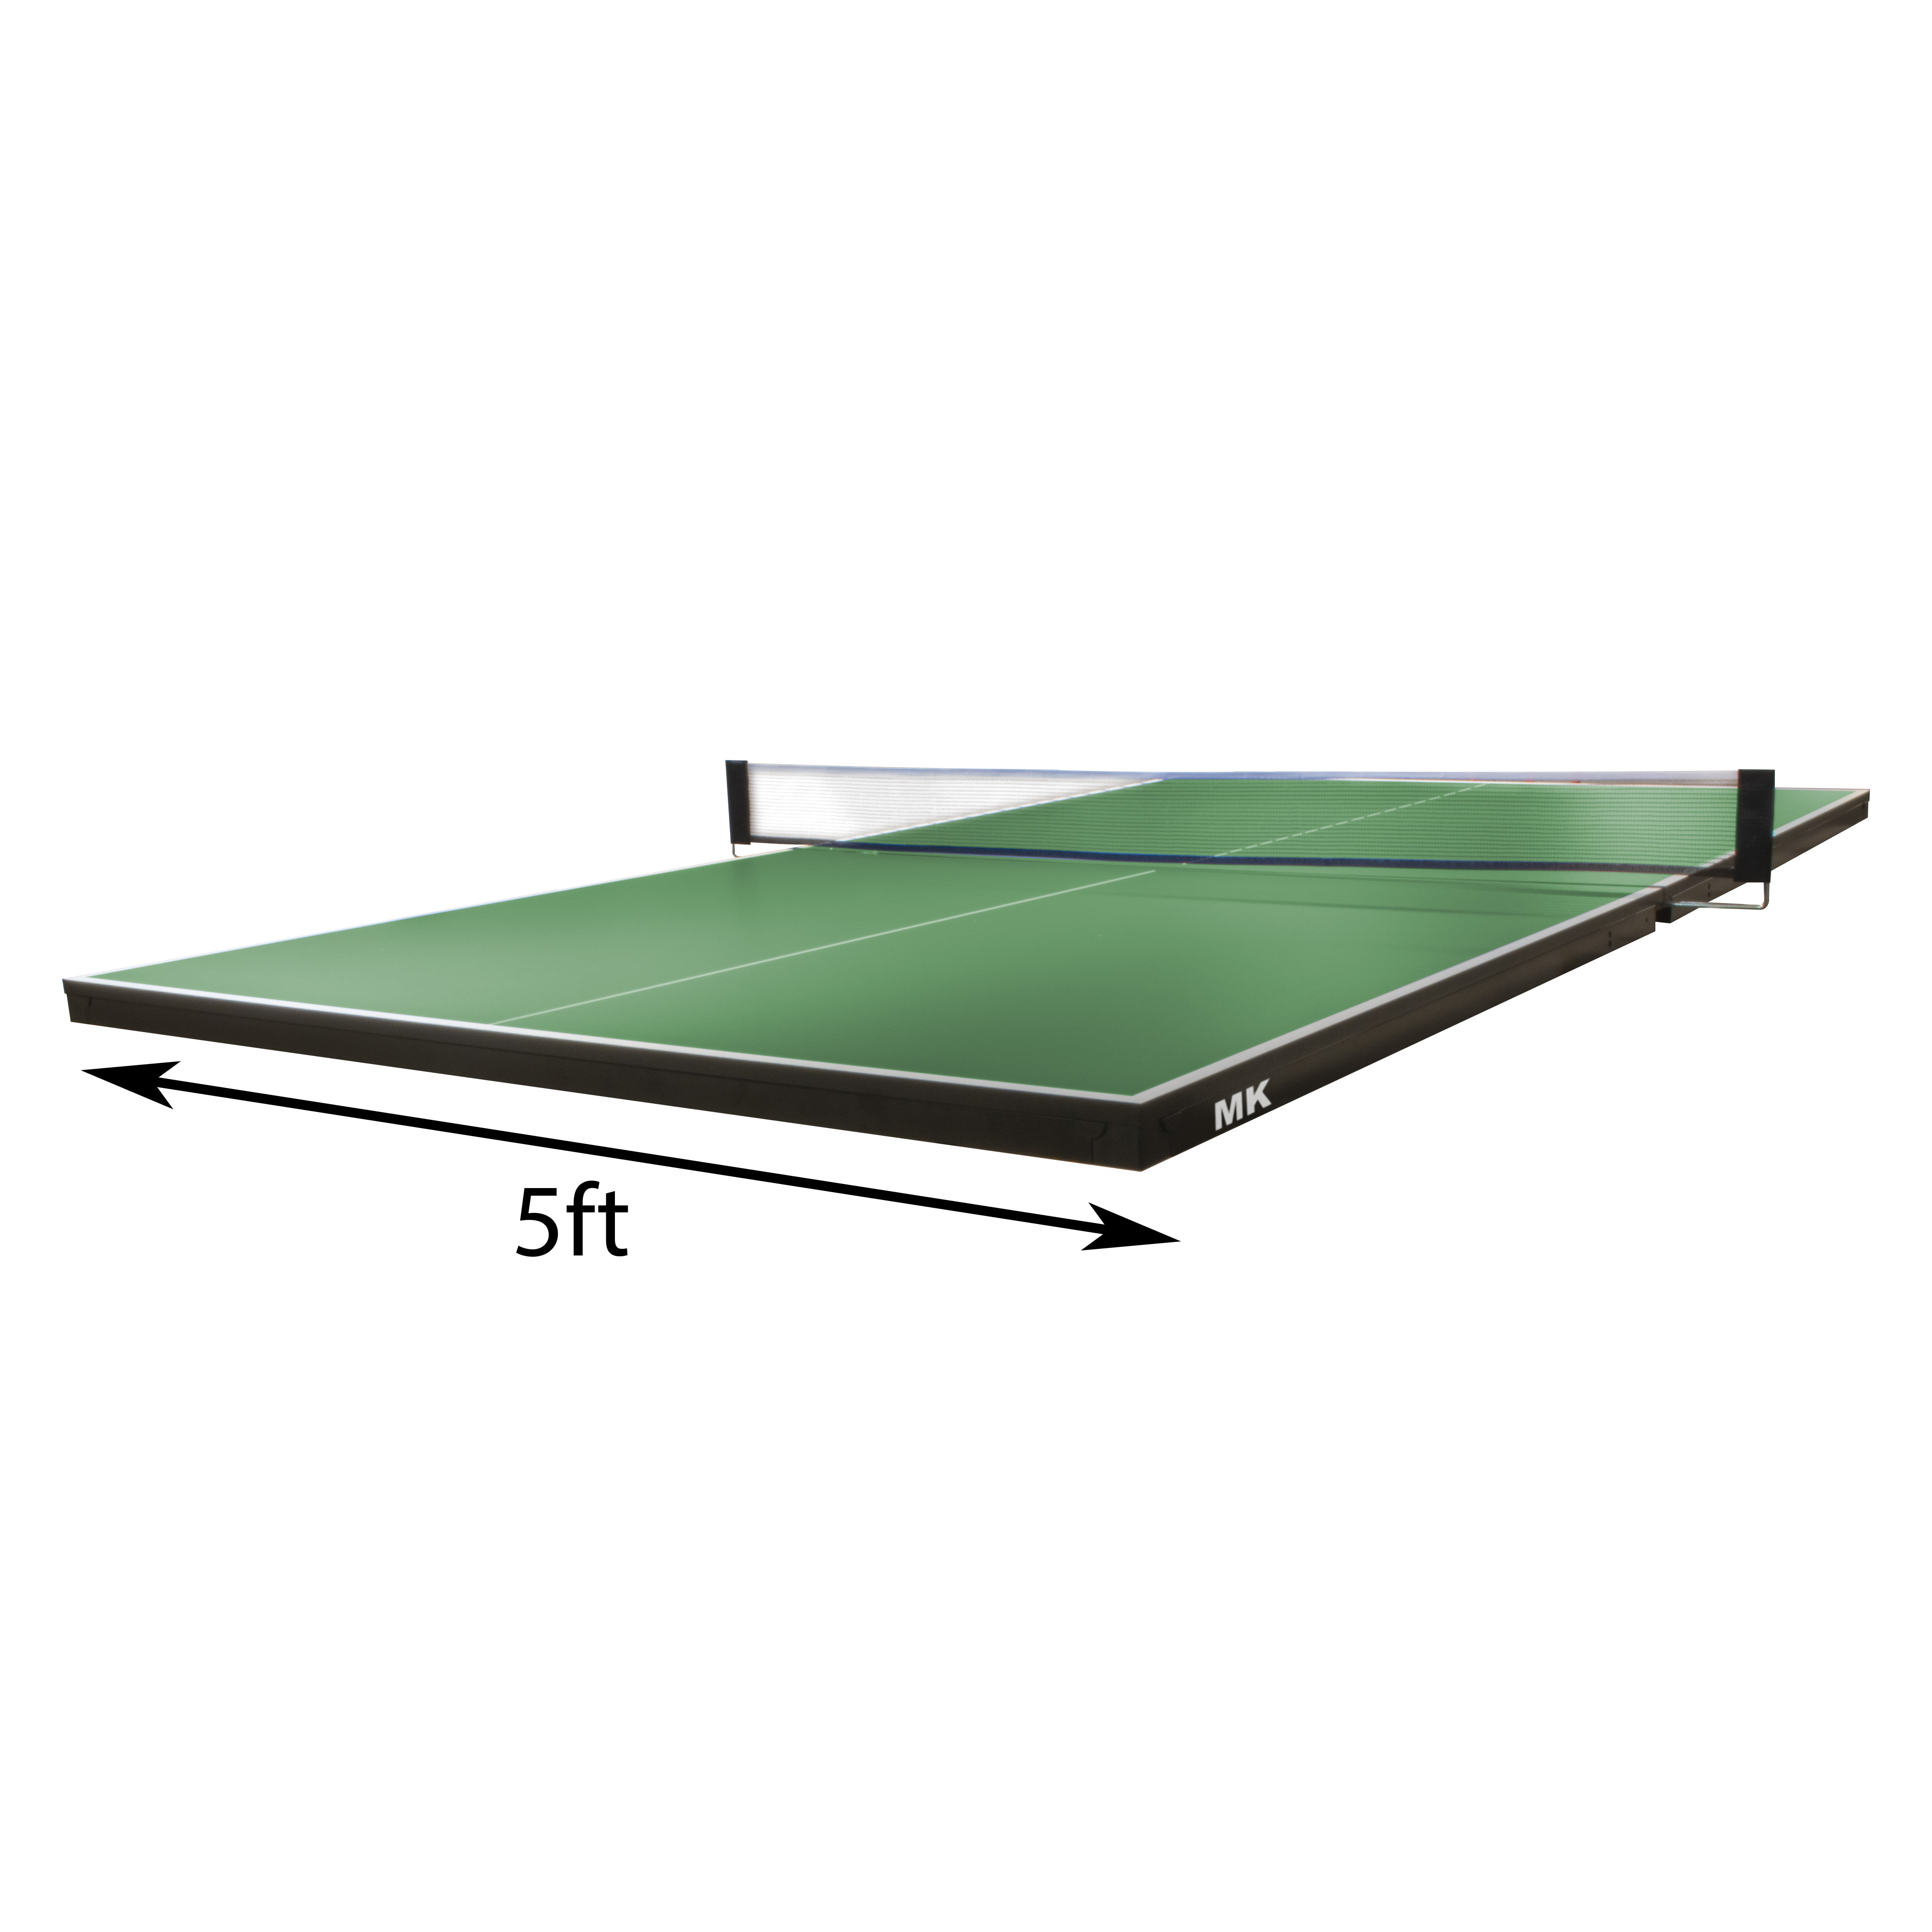 Conversion Table Tennis Game Table Table Tennis Table w/Warranty Ping Pong Table Top Table Top Games Martin Kilpatrick Ping Pong Table for Billiard Table Conversion Top for Pool Table Games